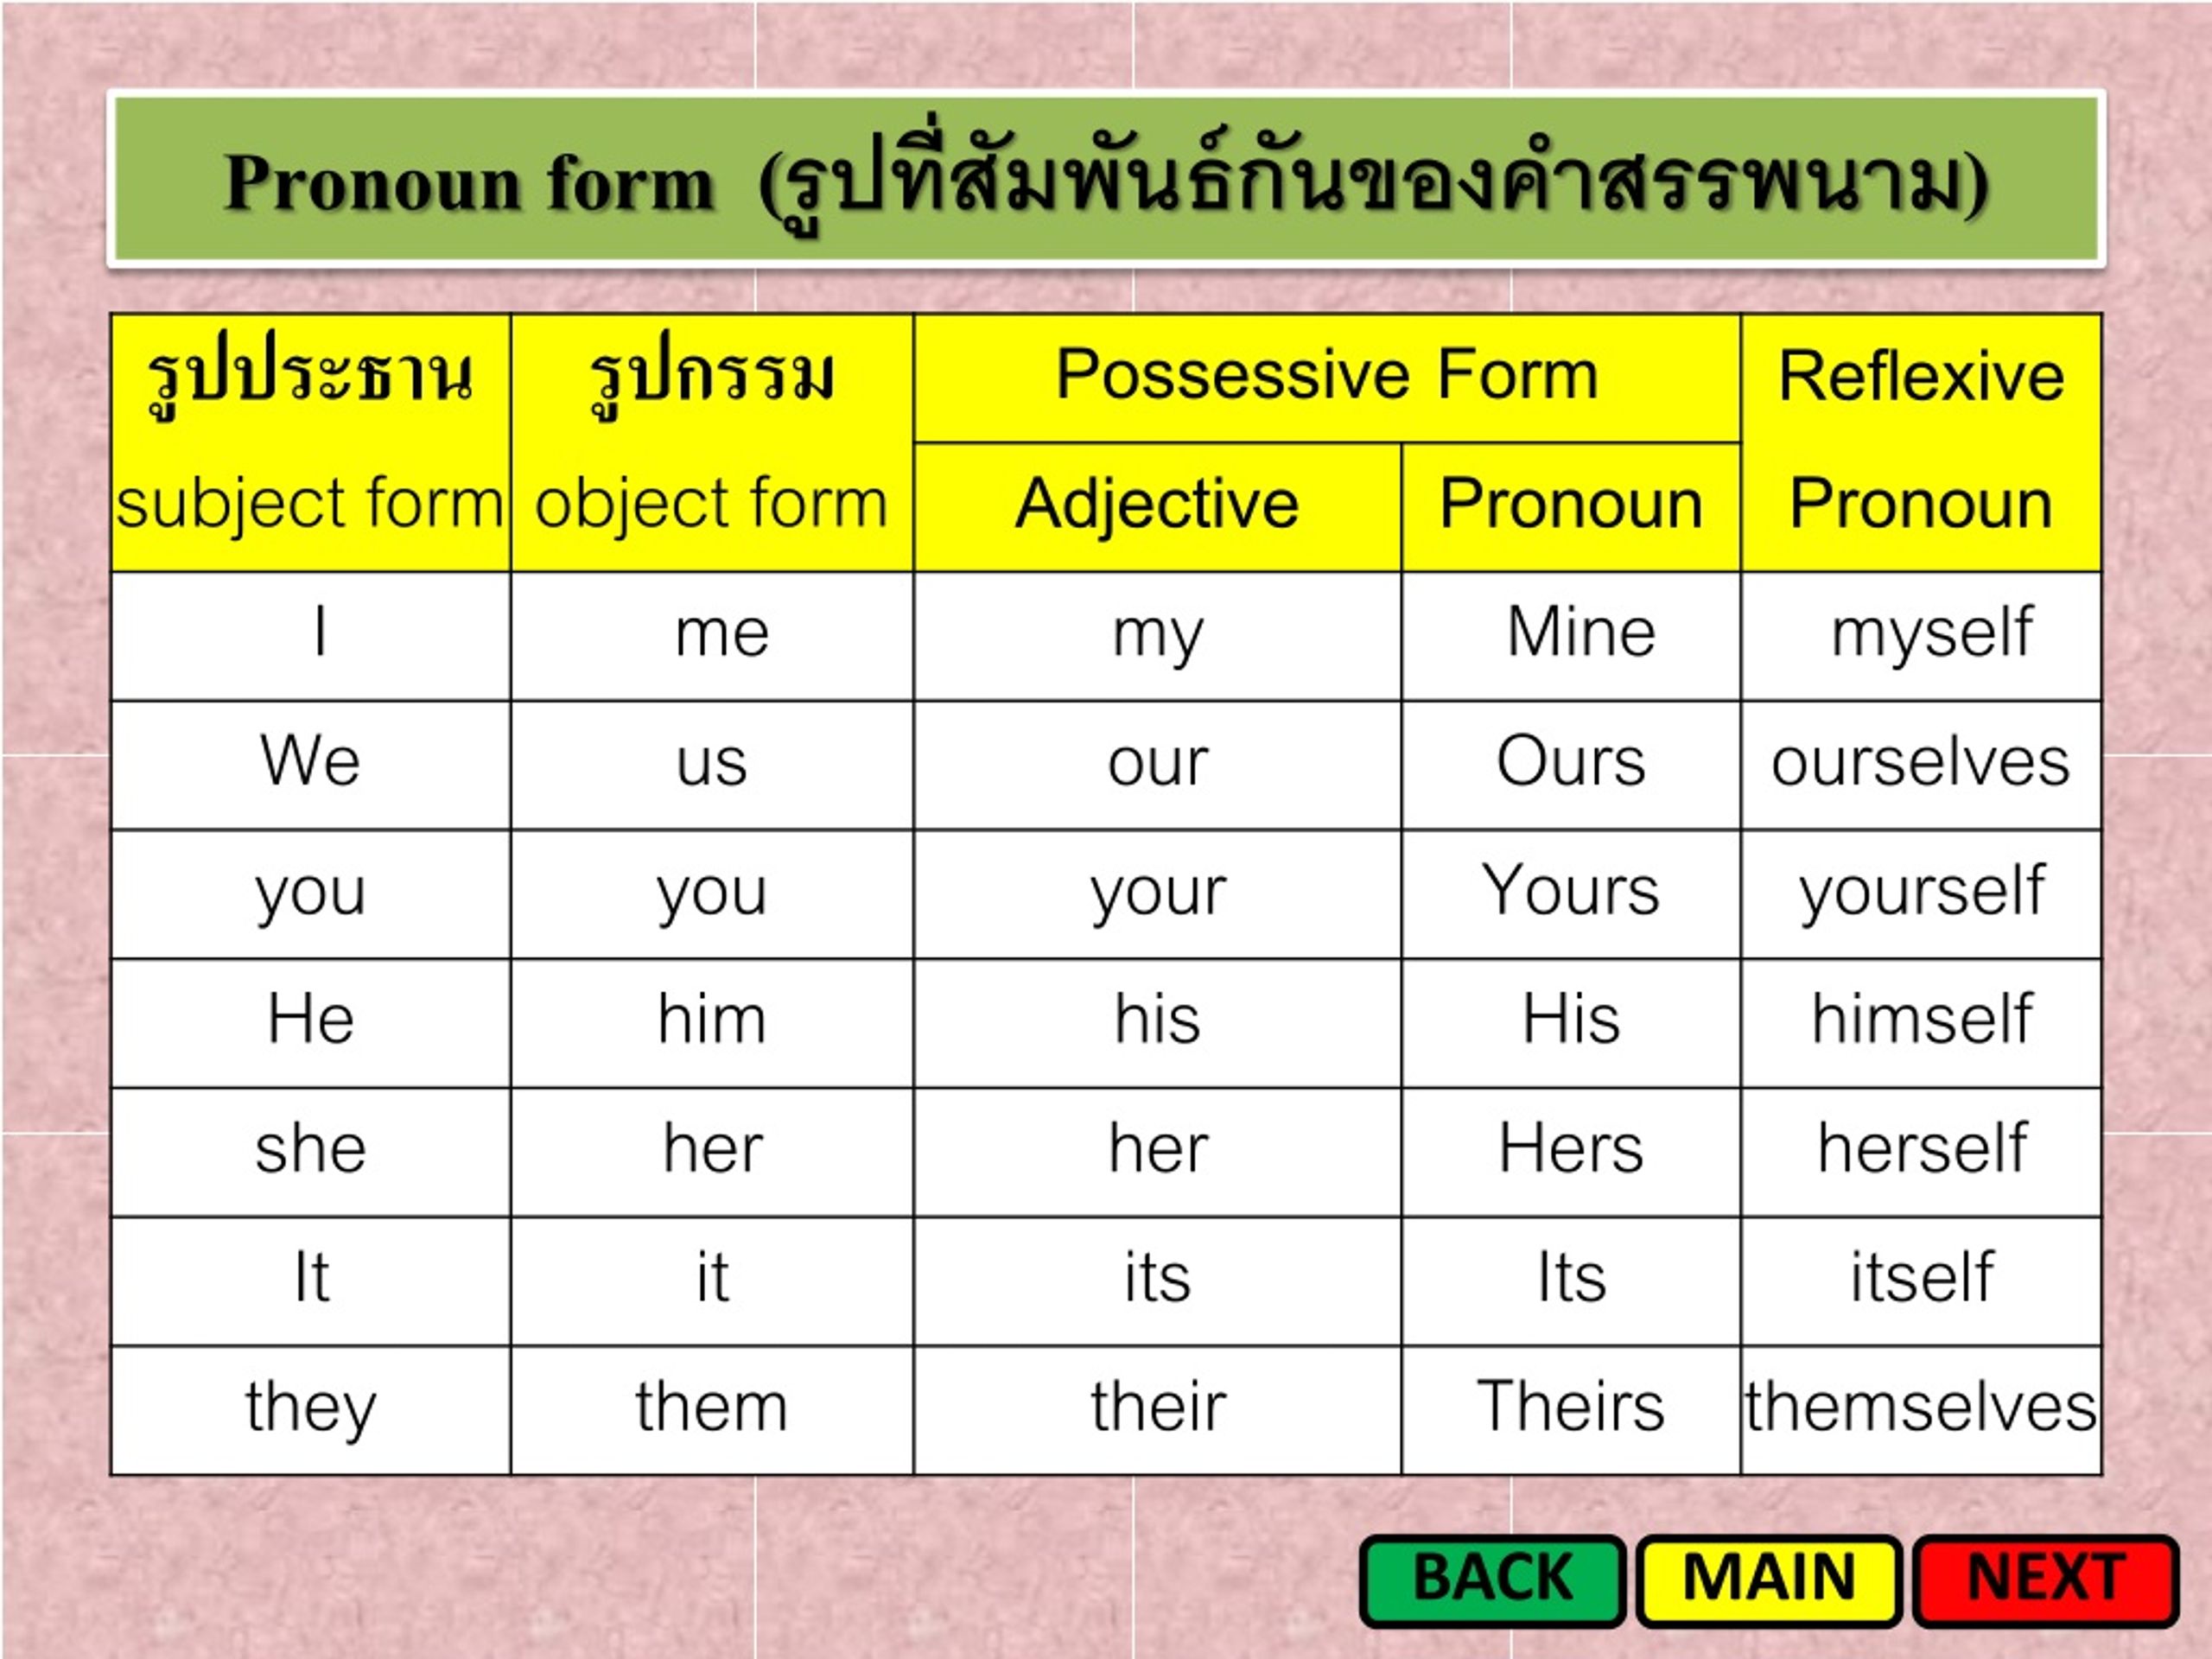 Object format. Possessive adjectives and pronouns. Possessive pronouns. Object possessive adjectives. Personal pronouns possessive pronouns таблица.